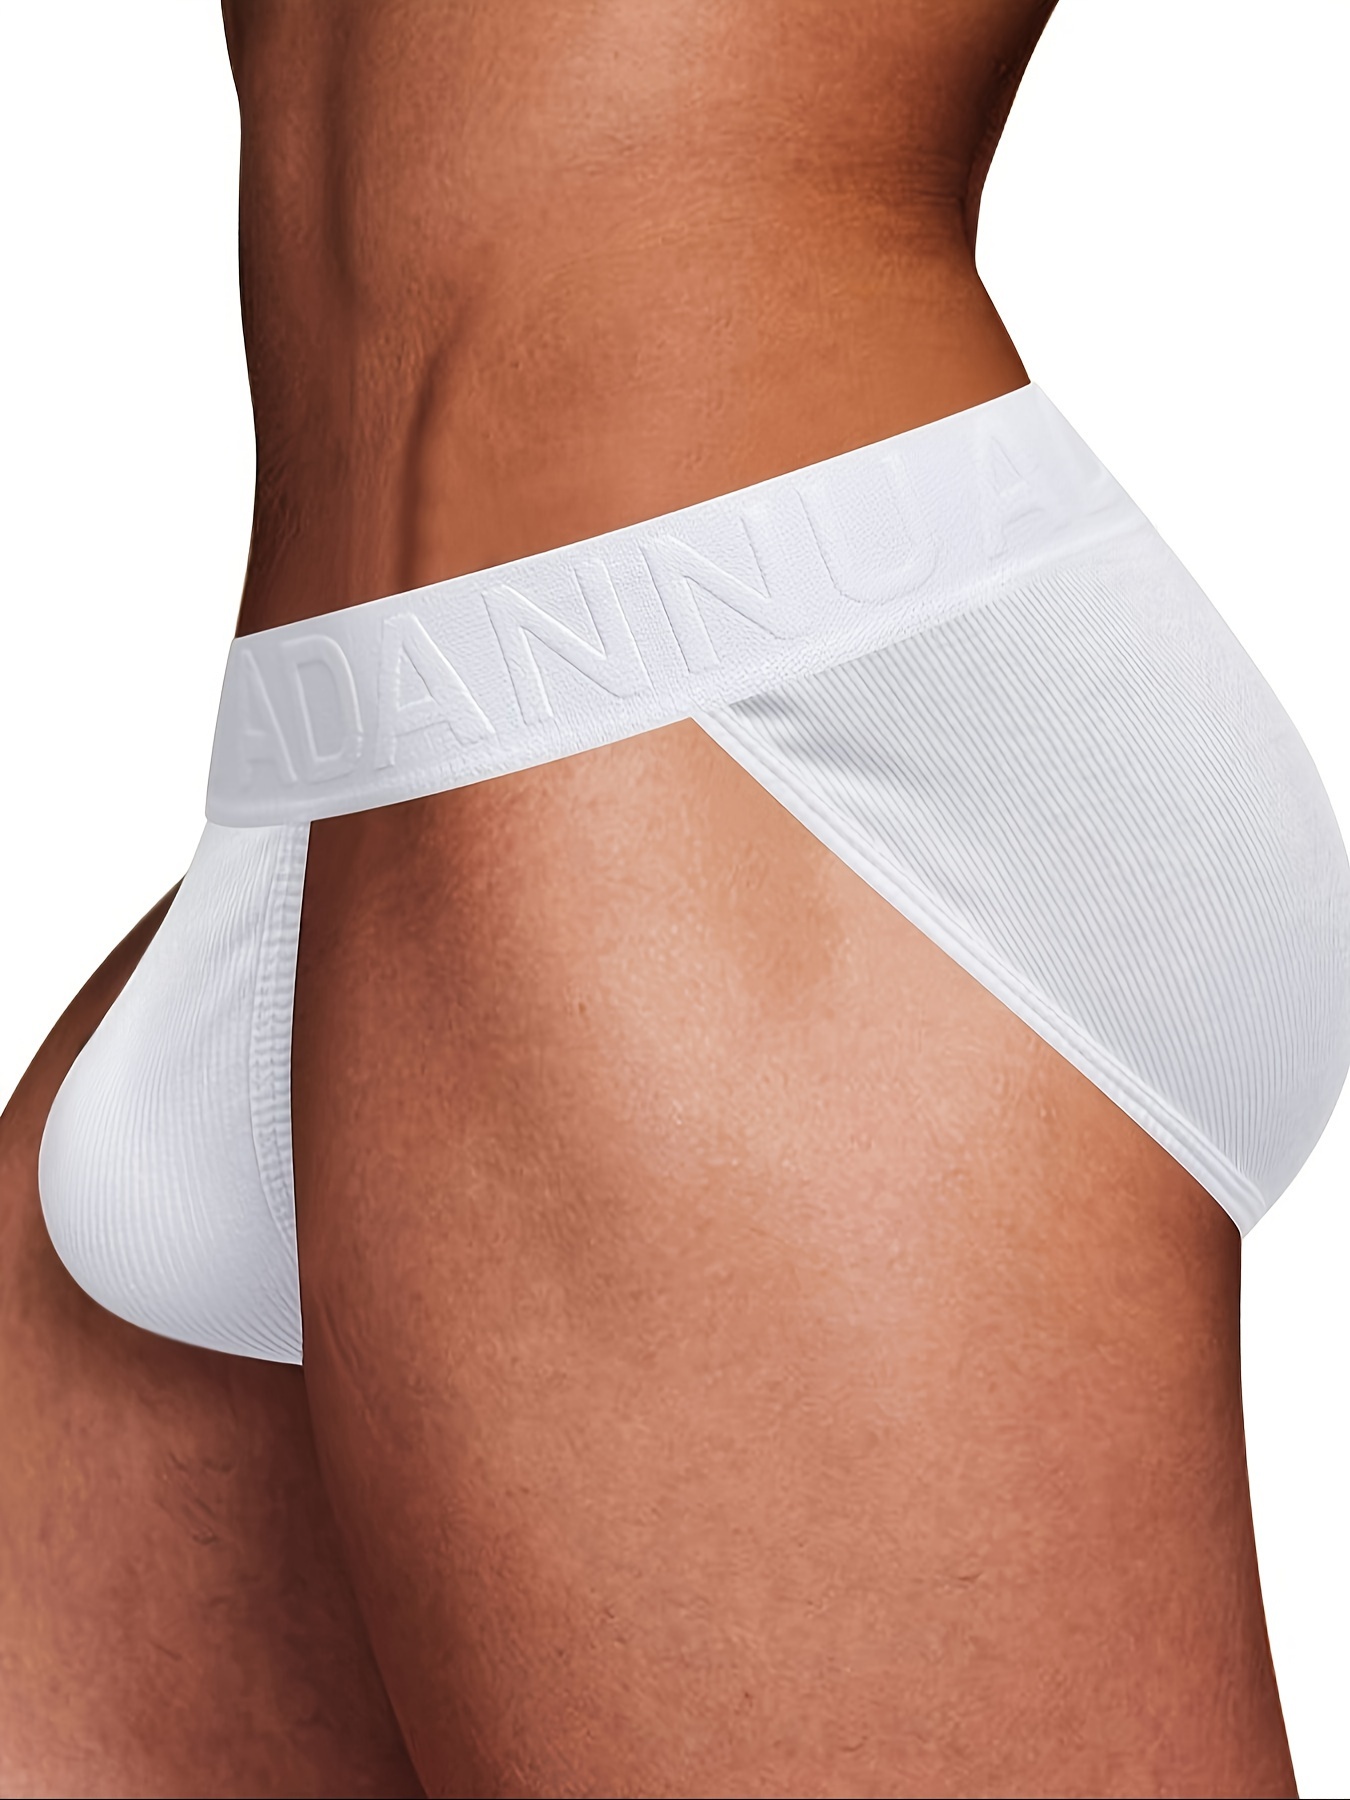 Men's Underwear With a Lift - Menwantmore